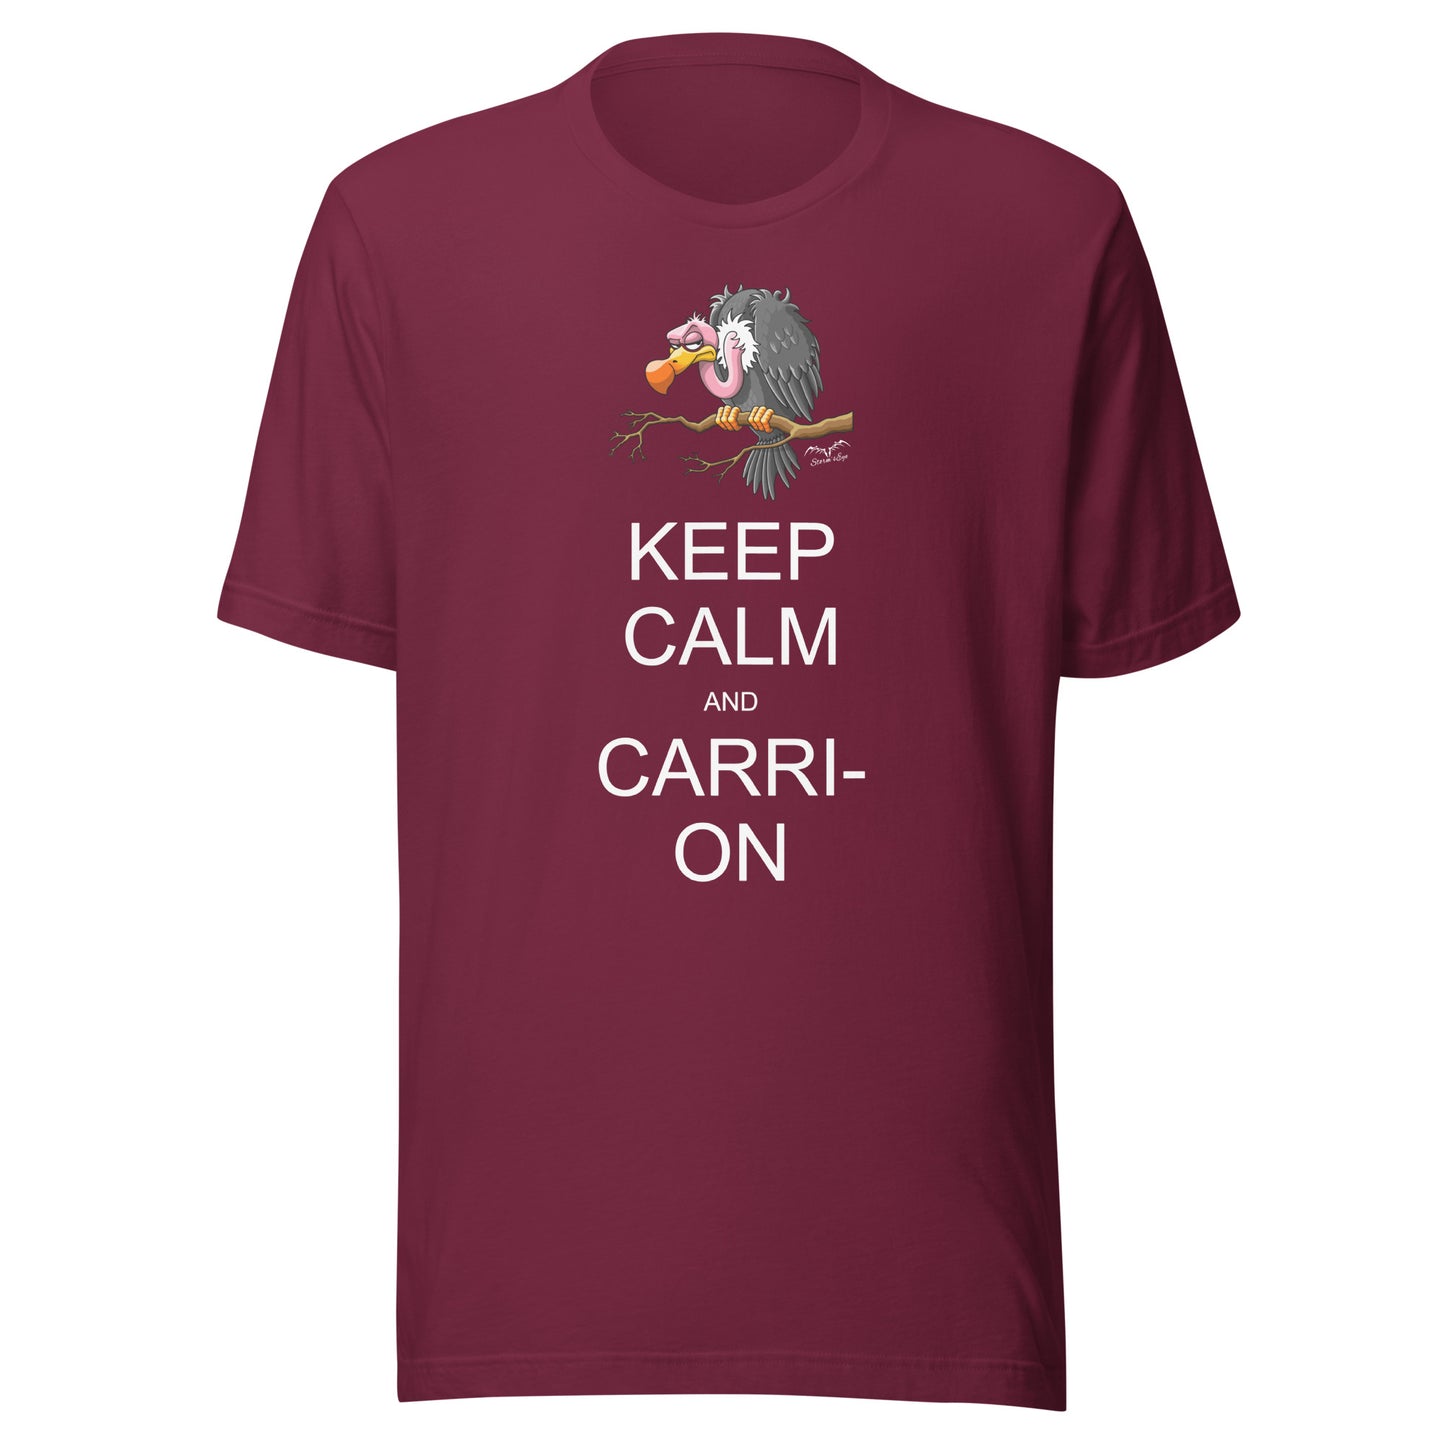 keep calm and carrion vulture t-shirt wine red by stormseye design